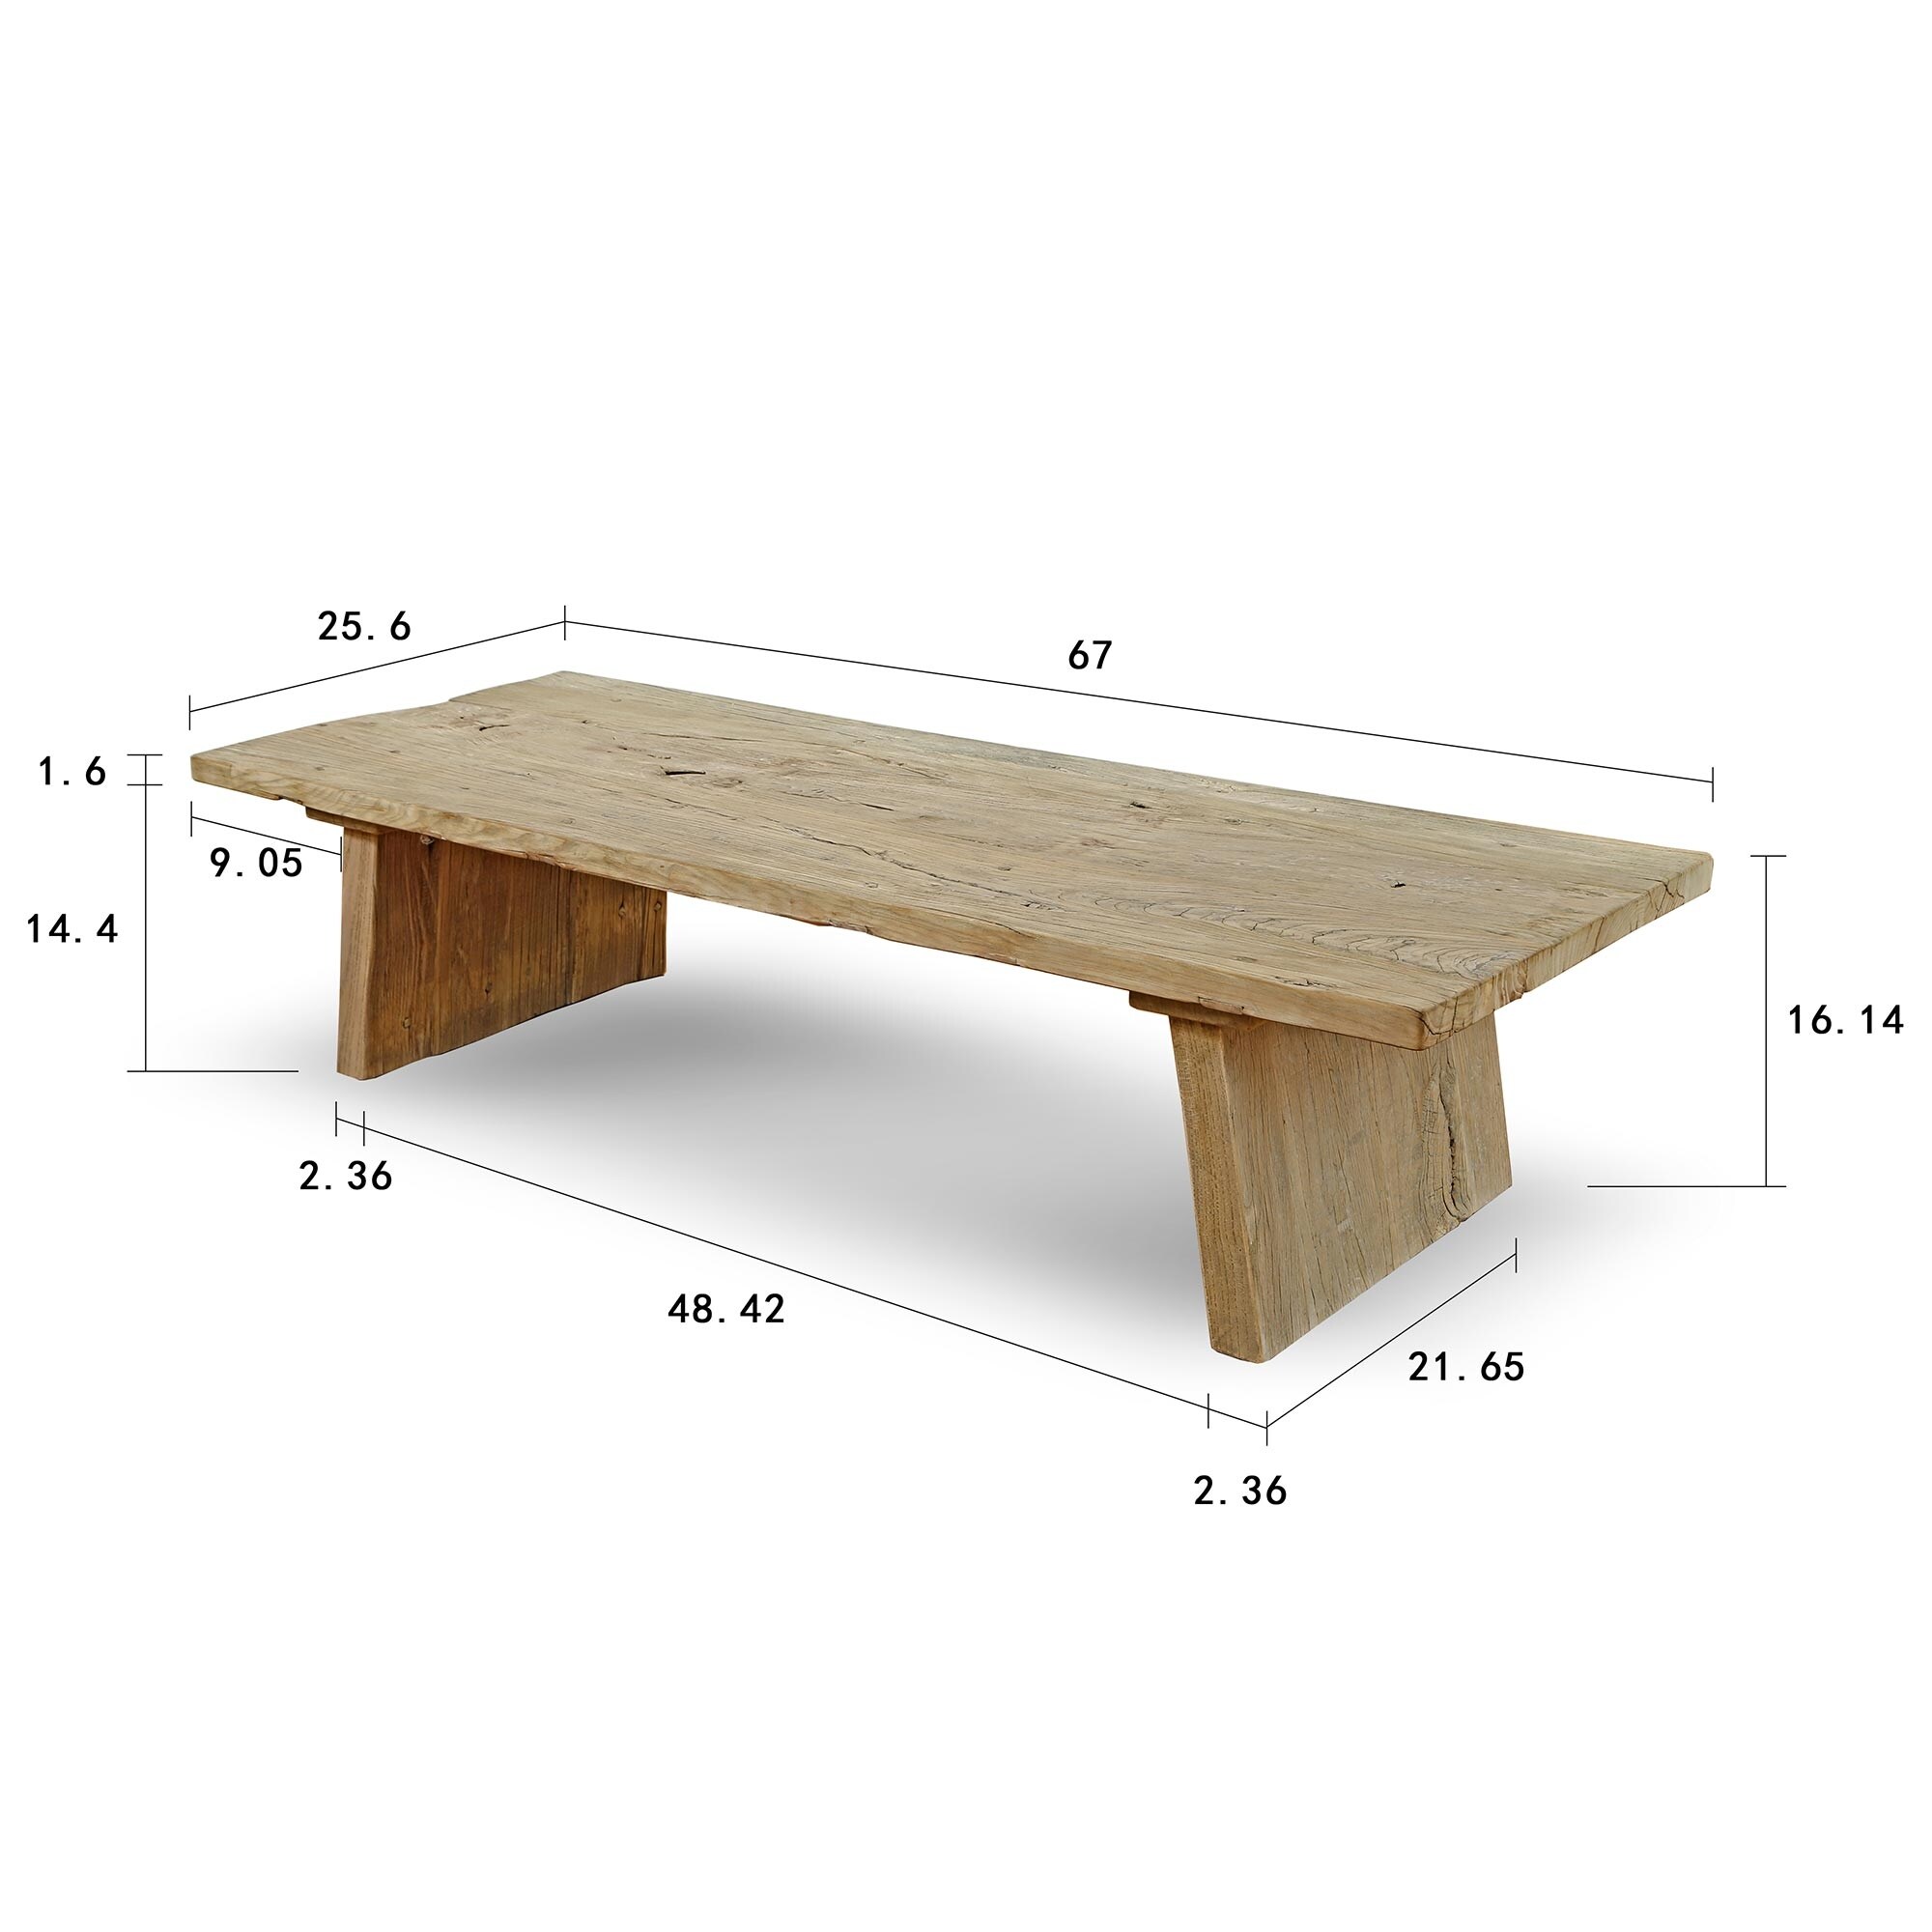 Artissance Laguna Weathered Coffee Table, 67 Inch Wide - 67 Inch Wide